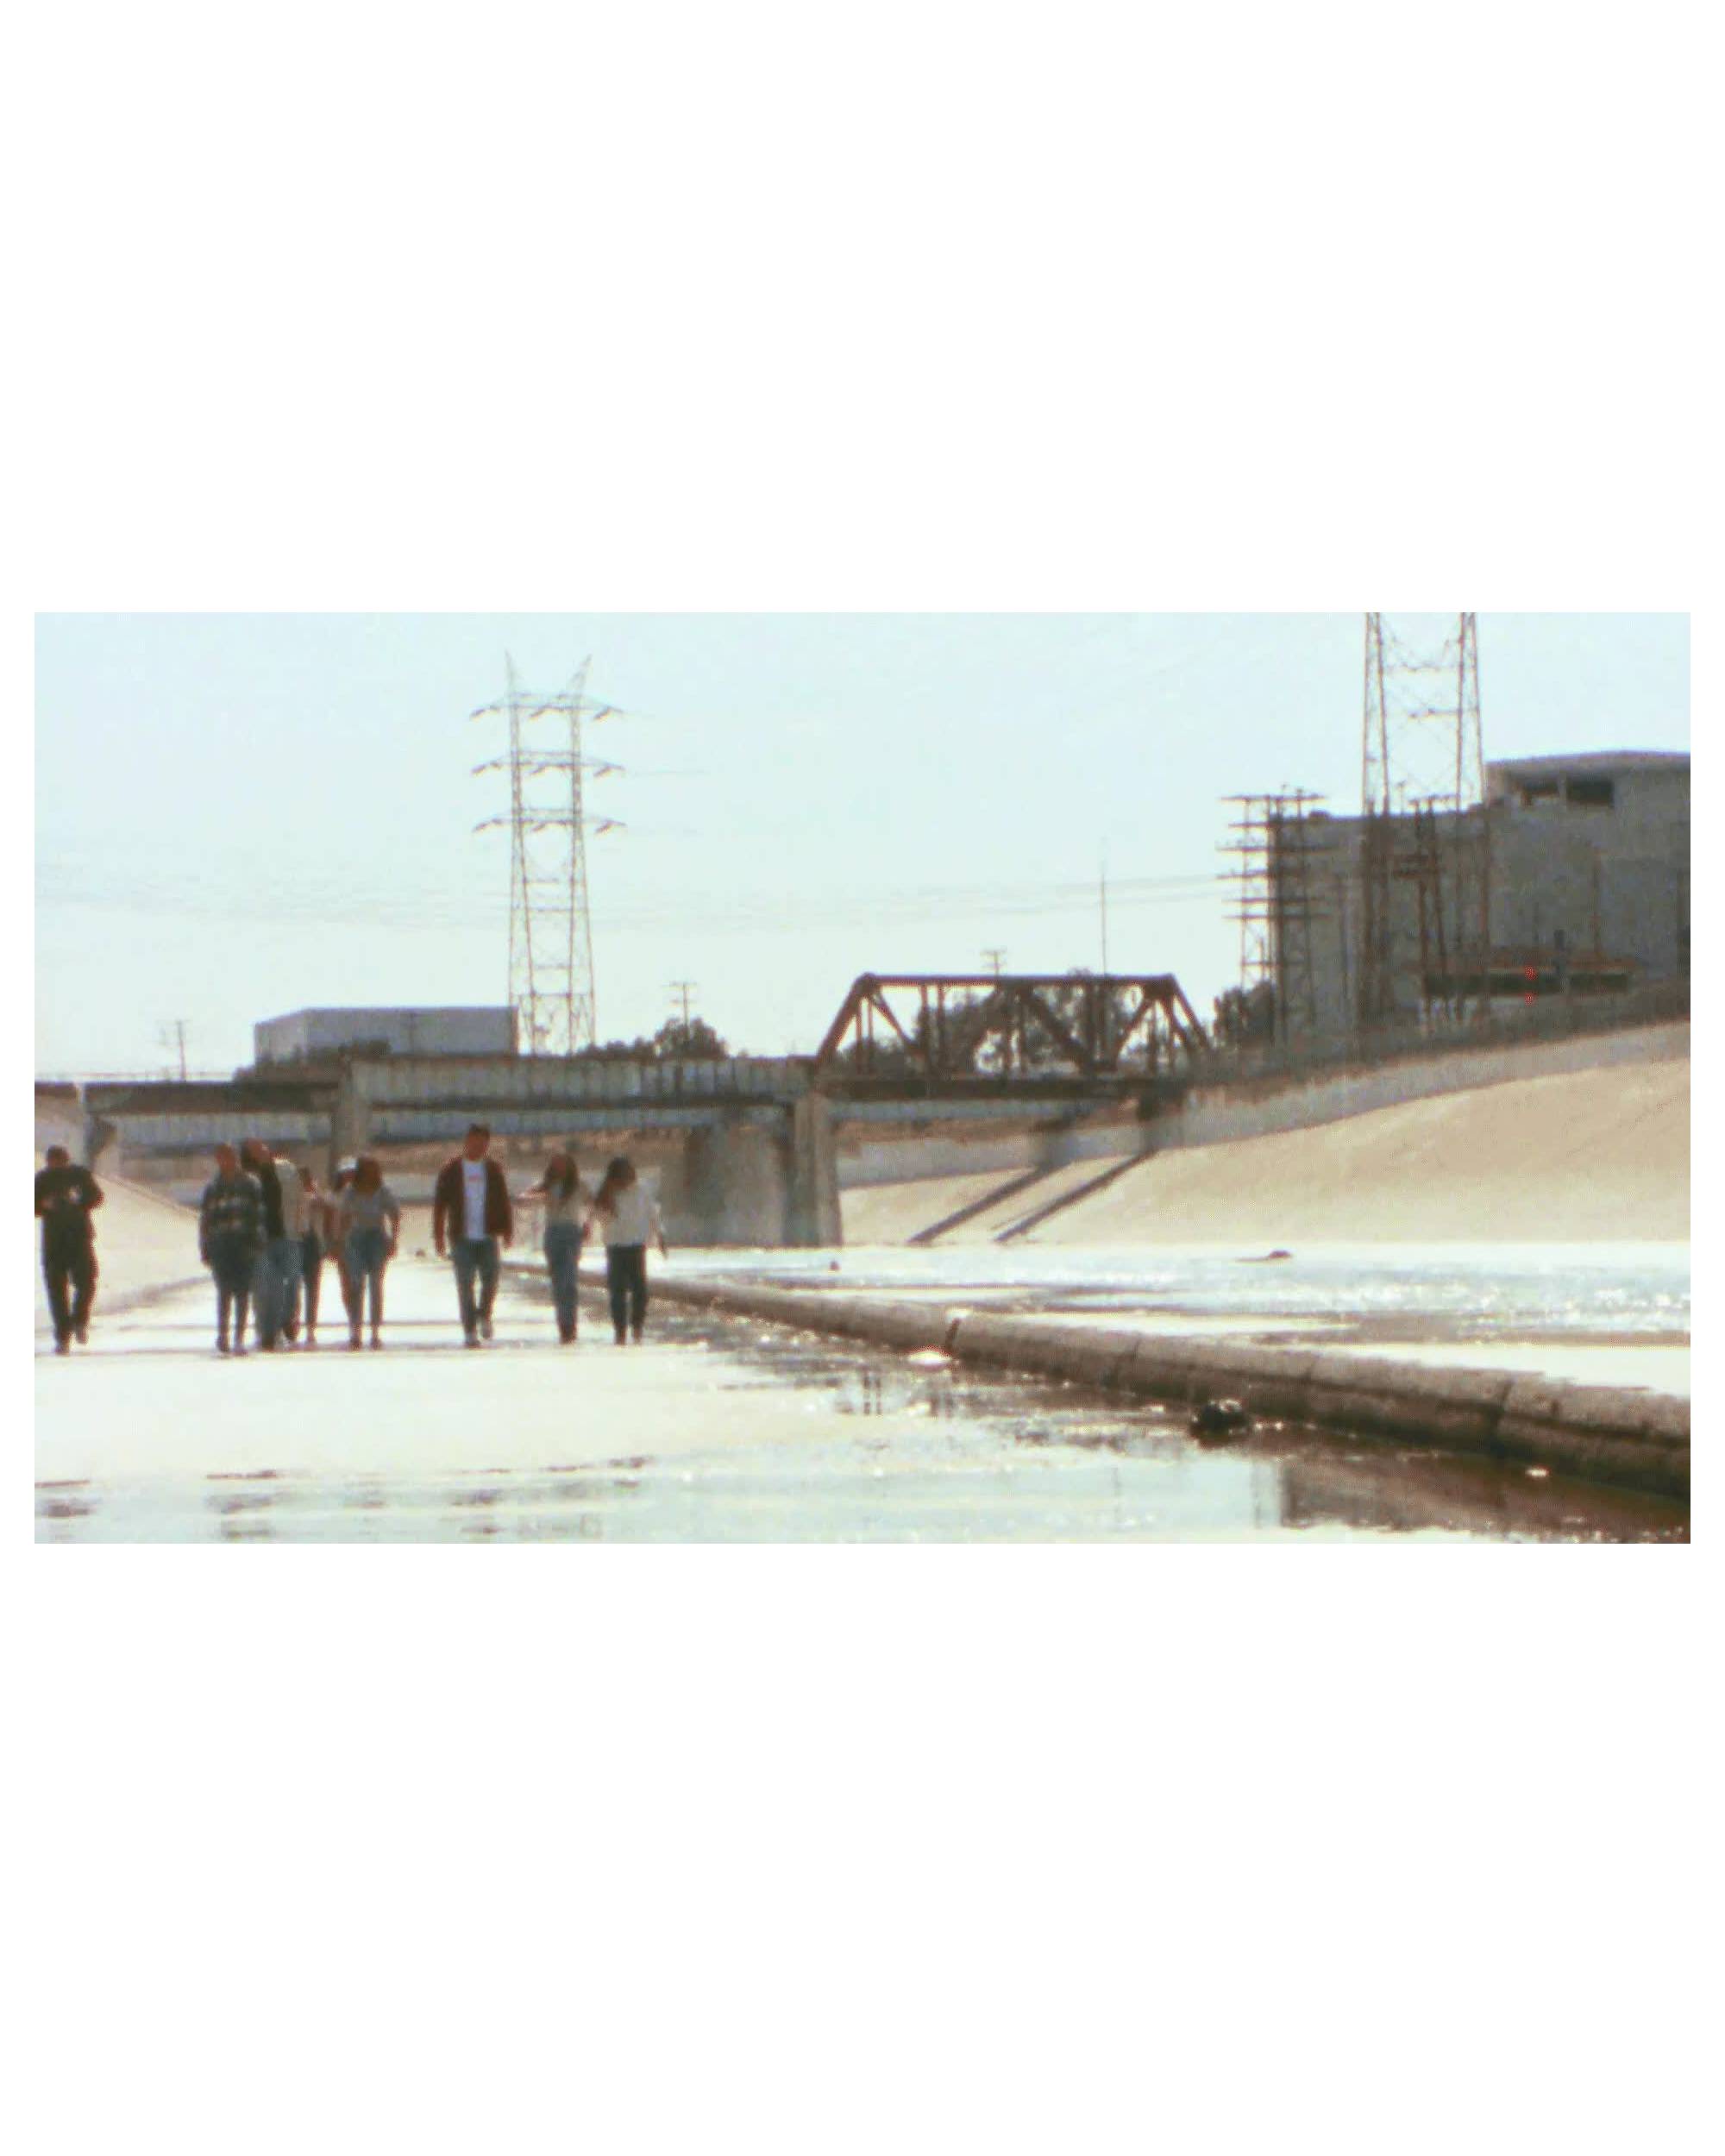 A Gif of Xiuhtezcatl and others walking down a cement waterway.